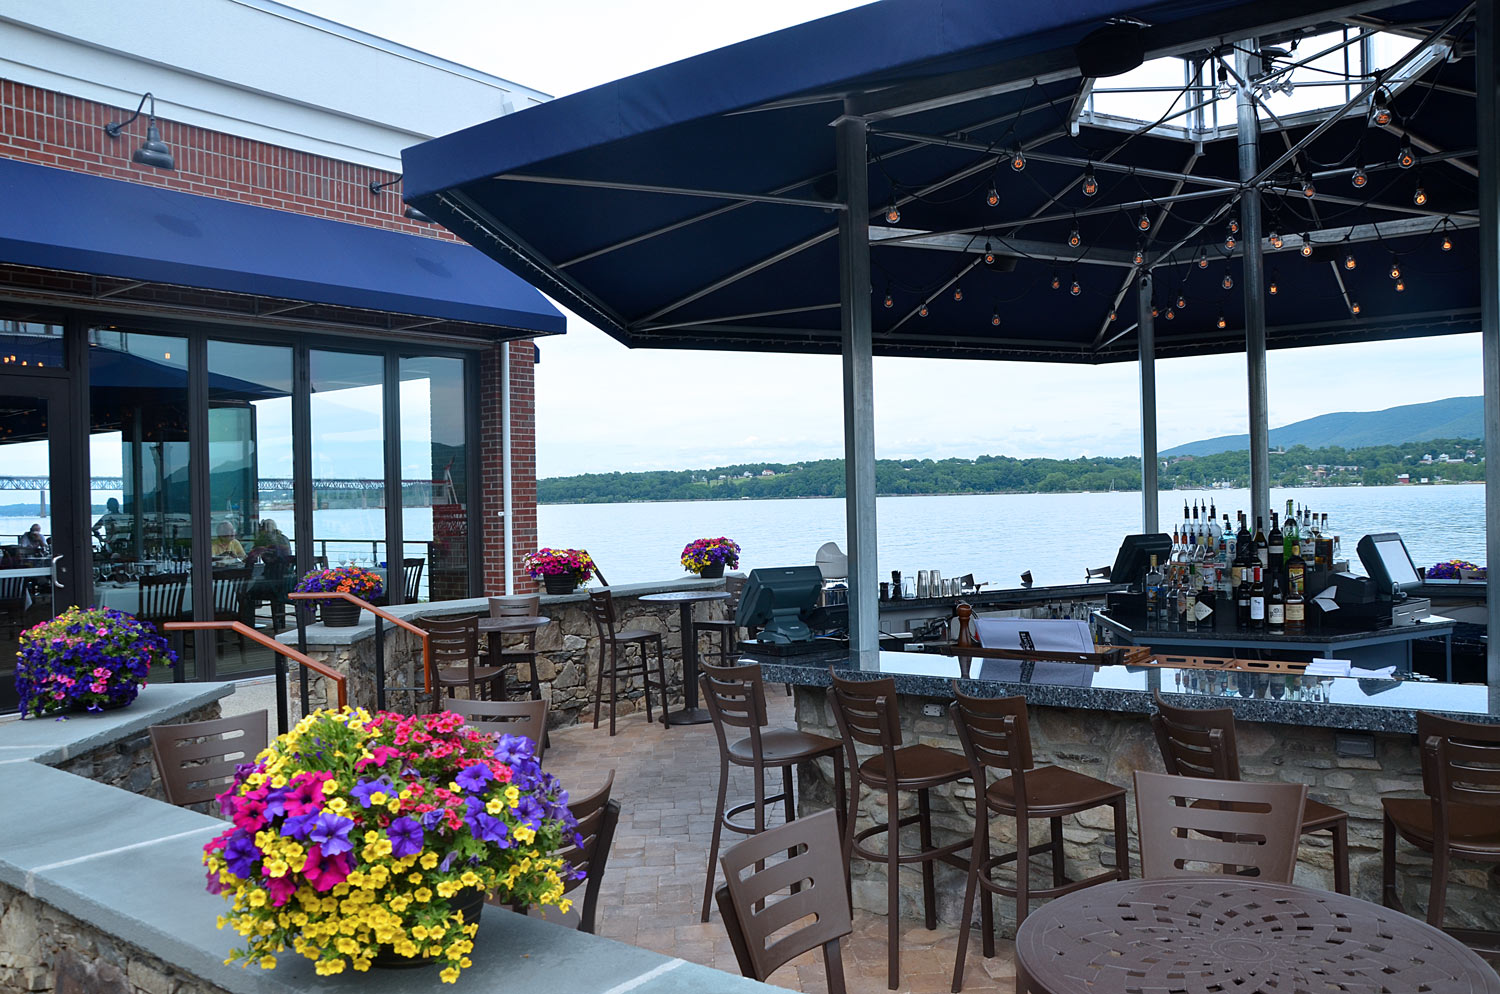 View of the outside patio bar with Hudson River in the background